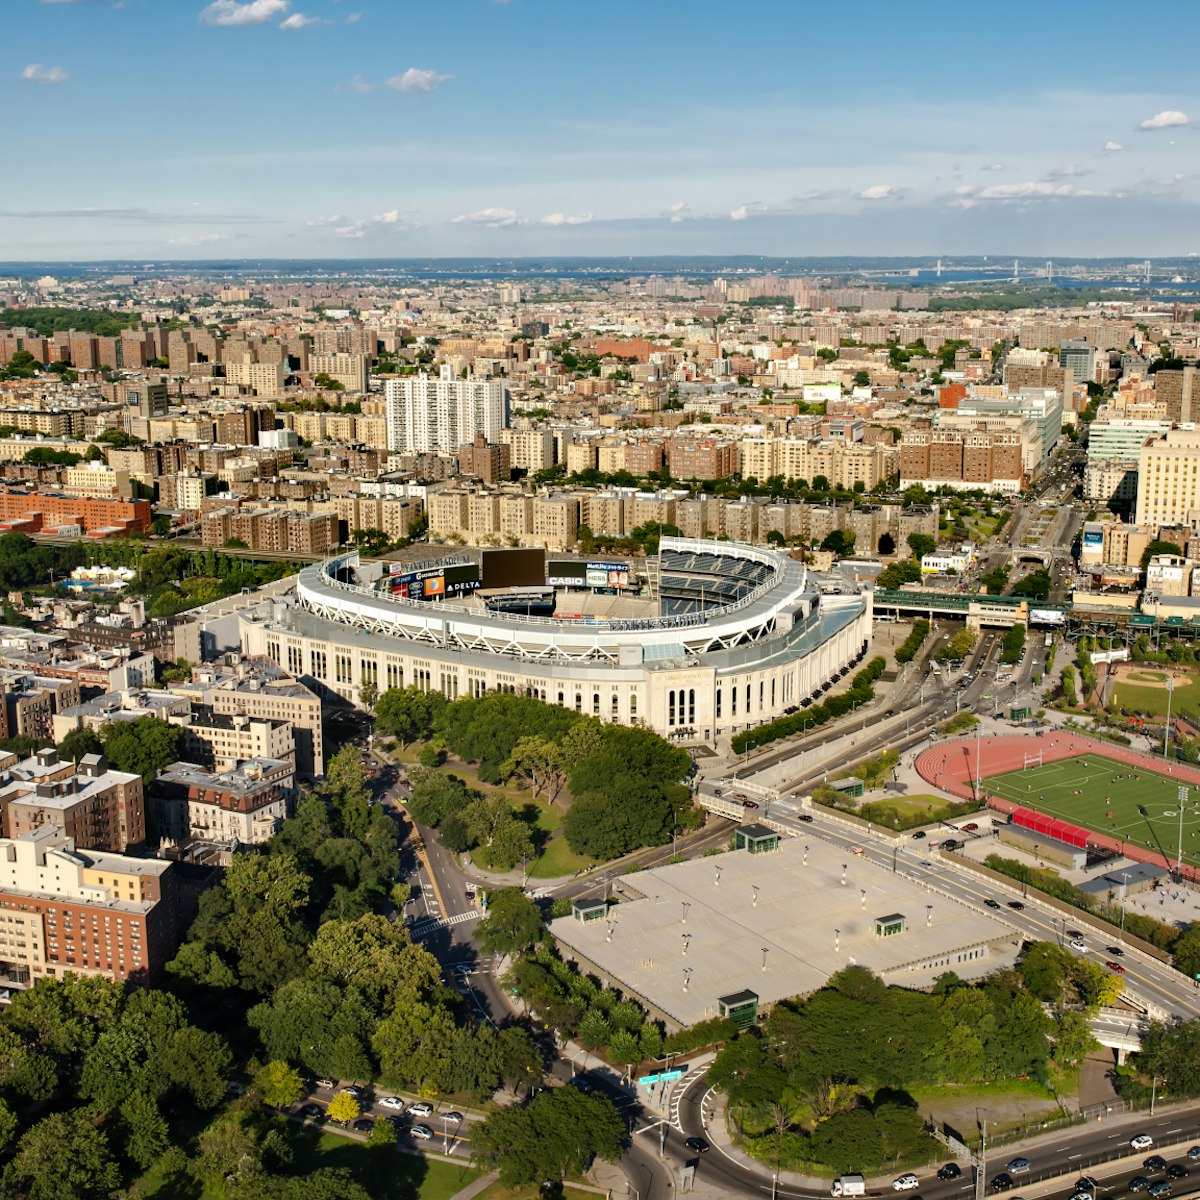 500px Photo ID: 124465989 - late afternoon aerial photography of Yankee Stadium, Bronx, NY